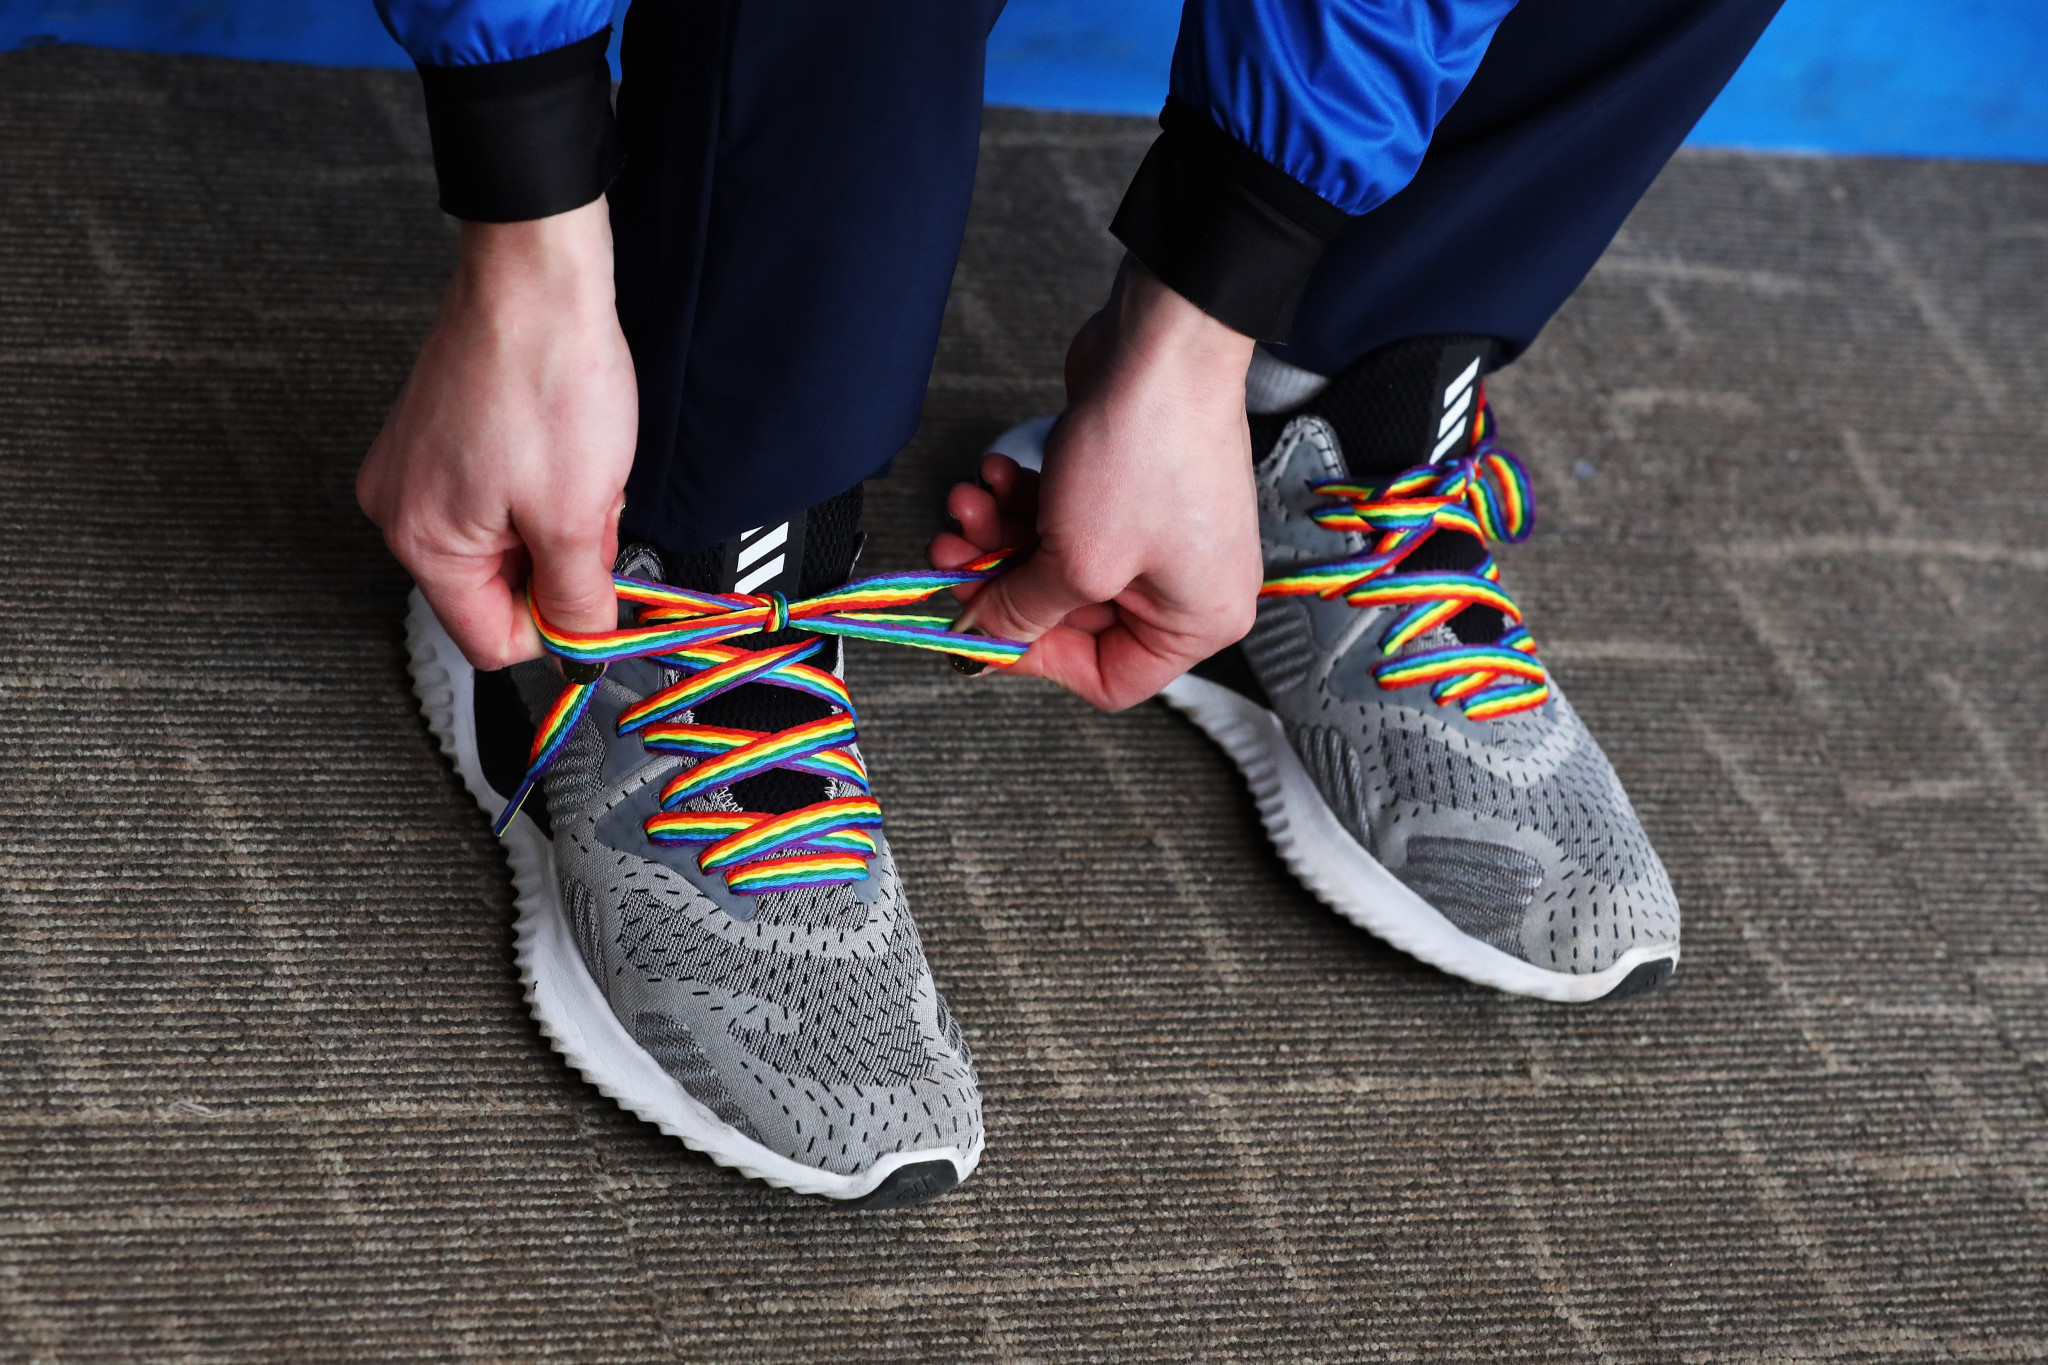 The rainbow laces campaign supports LGBT people ©Getty Images